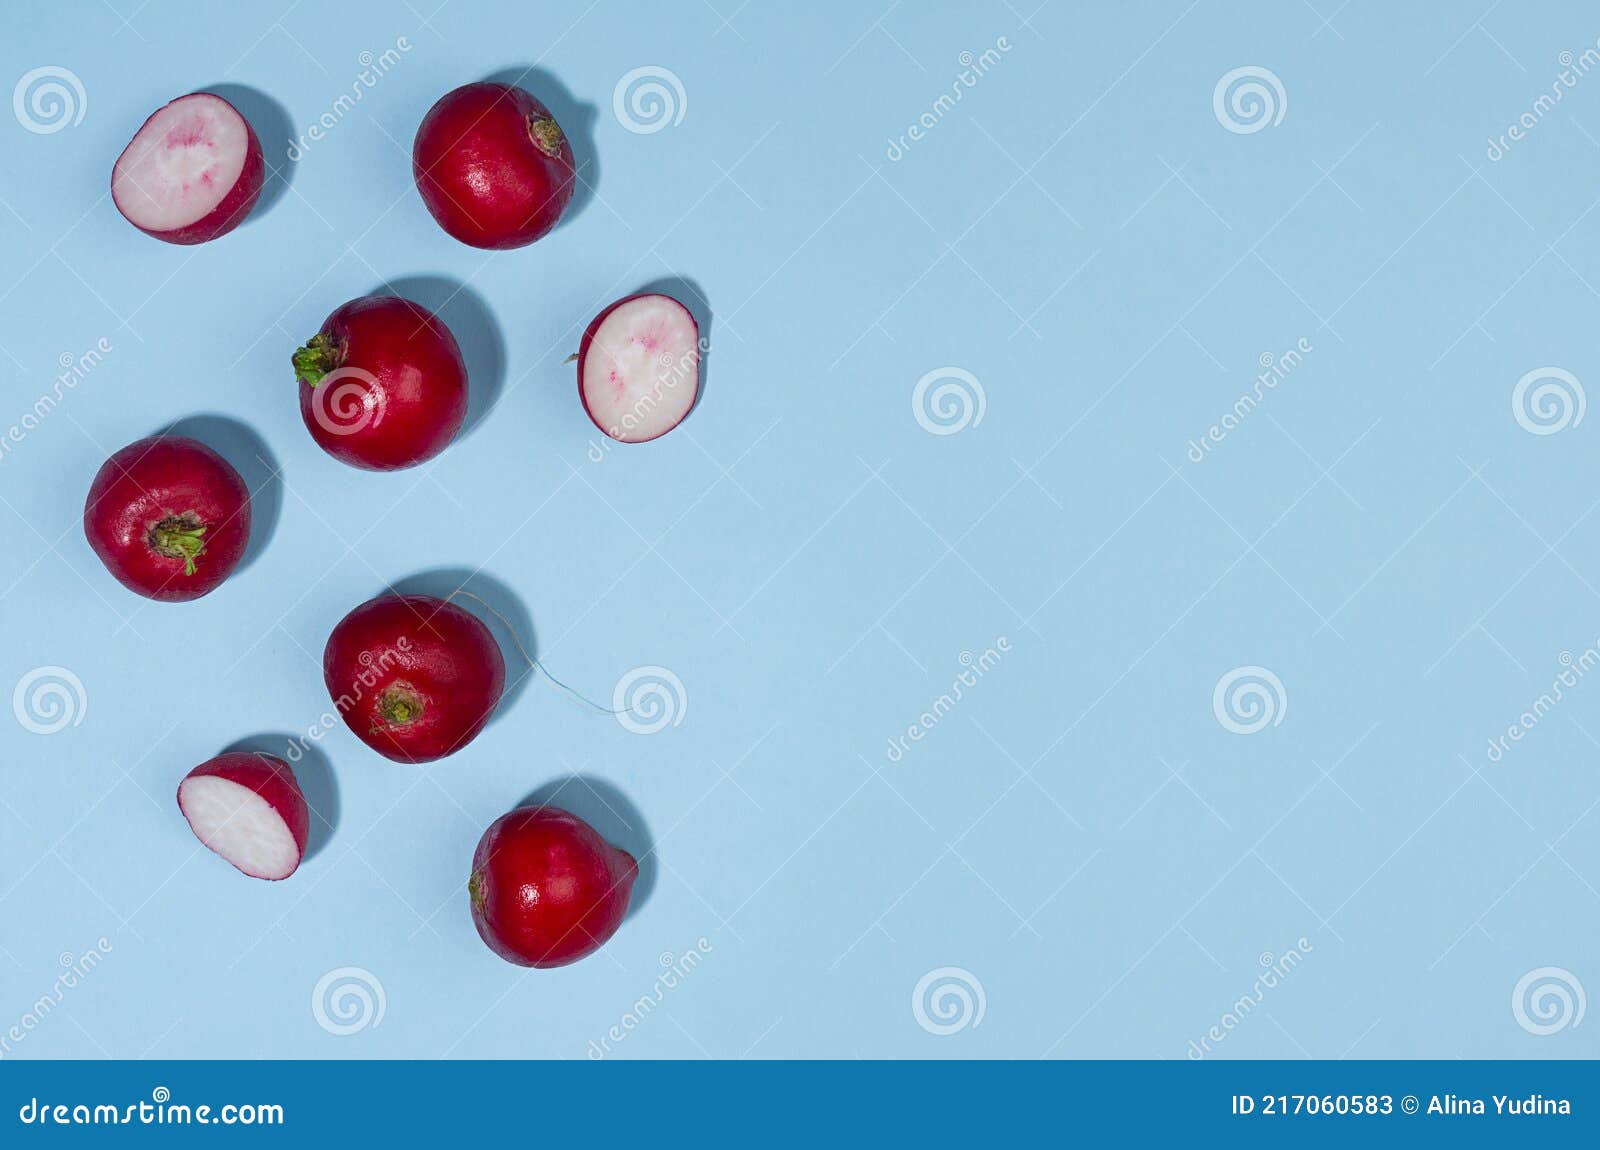 Radish with on Backdrop As Border, Top View. Modern Color Vegetable Background. Stock Image - Image of healthy: